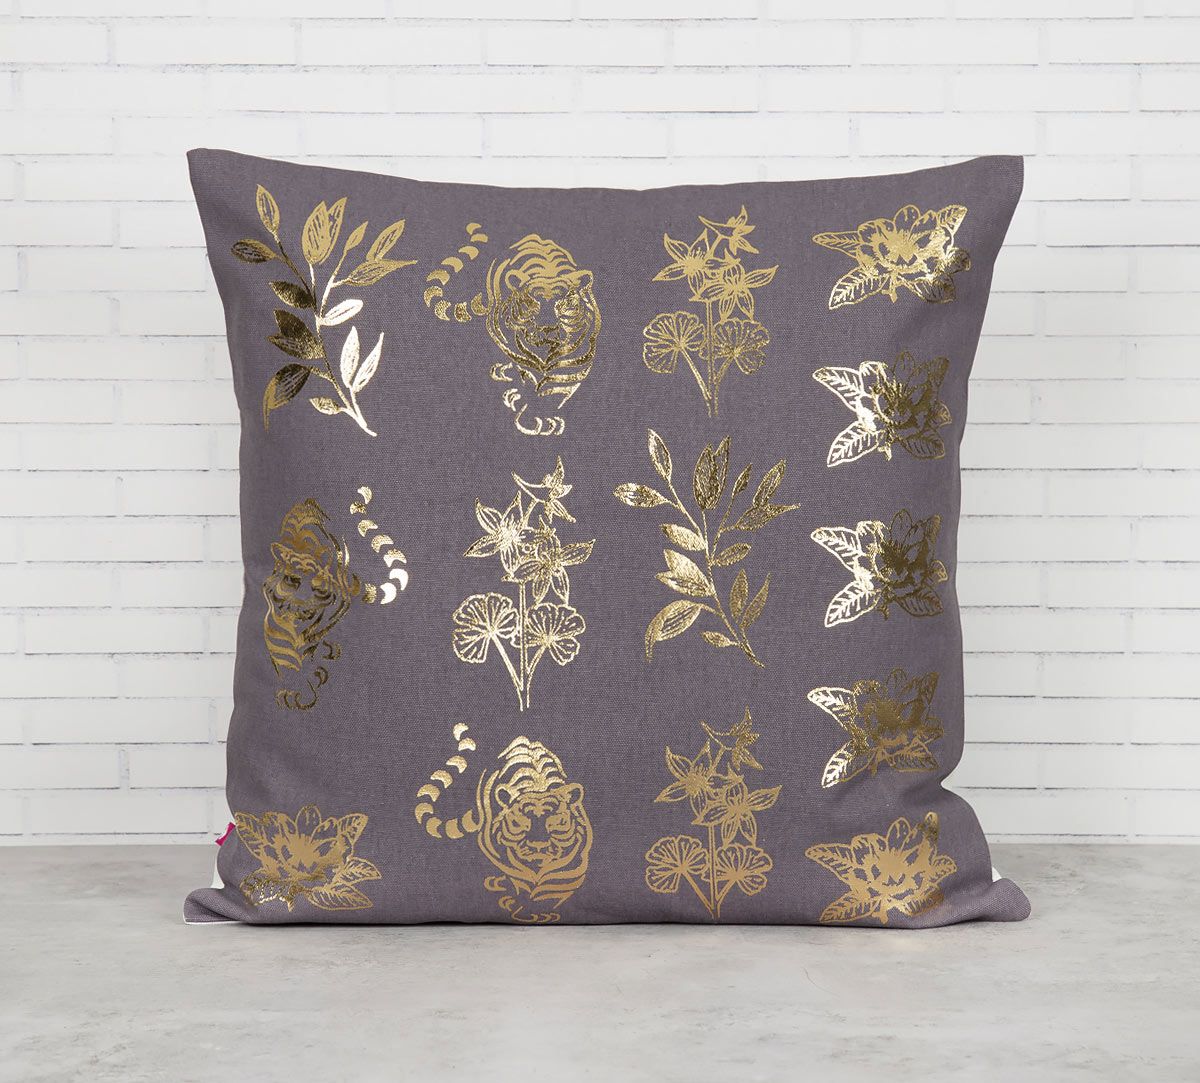 India Circus Floral Sketch Foil Cushion Cover